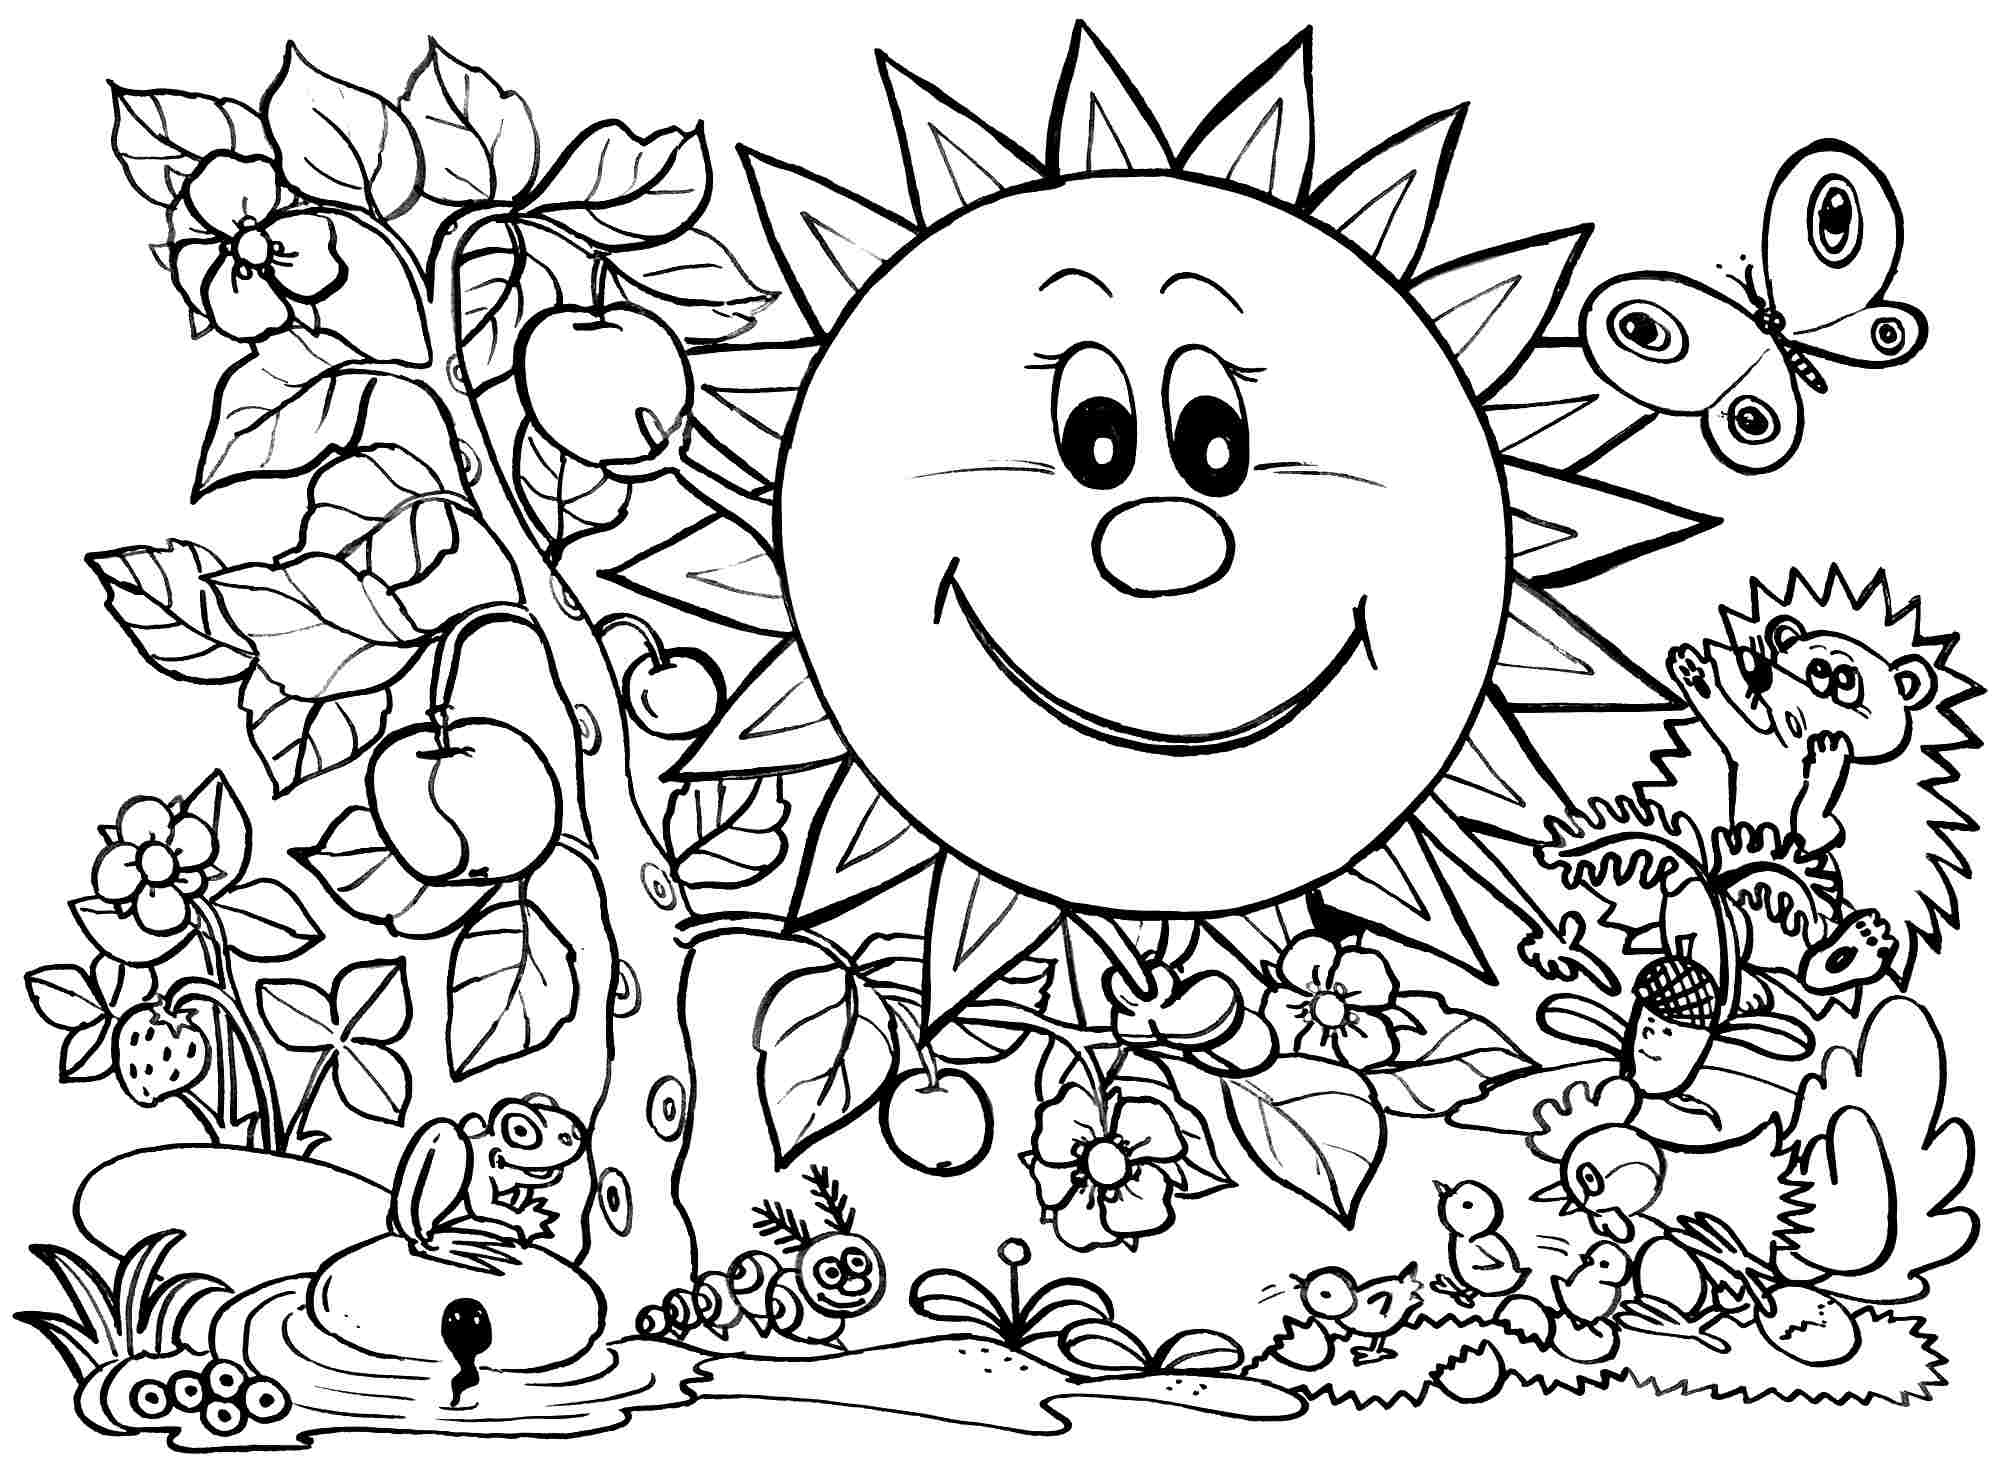 Coloring Pages : Spring Coloring Pages For Preschoolers Free Kids - Spring Coloring Sheets Free Printable